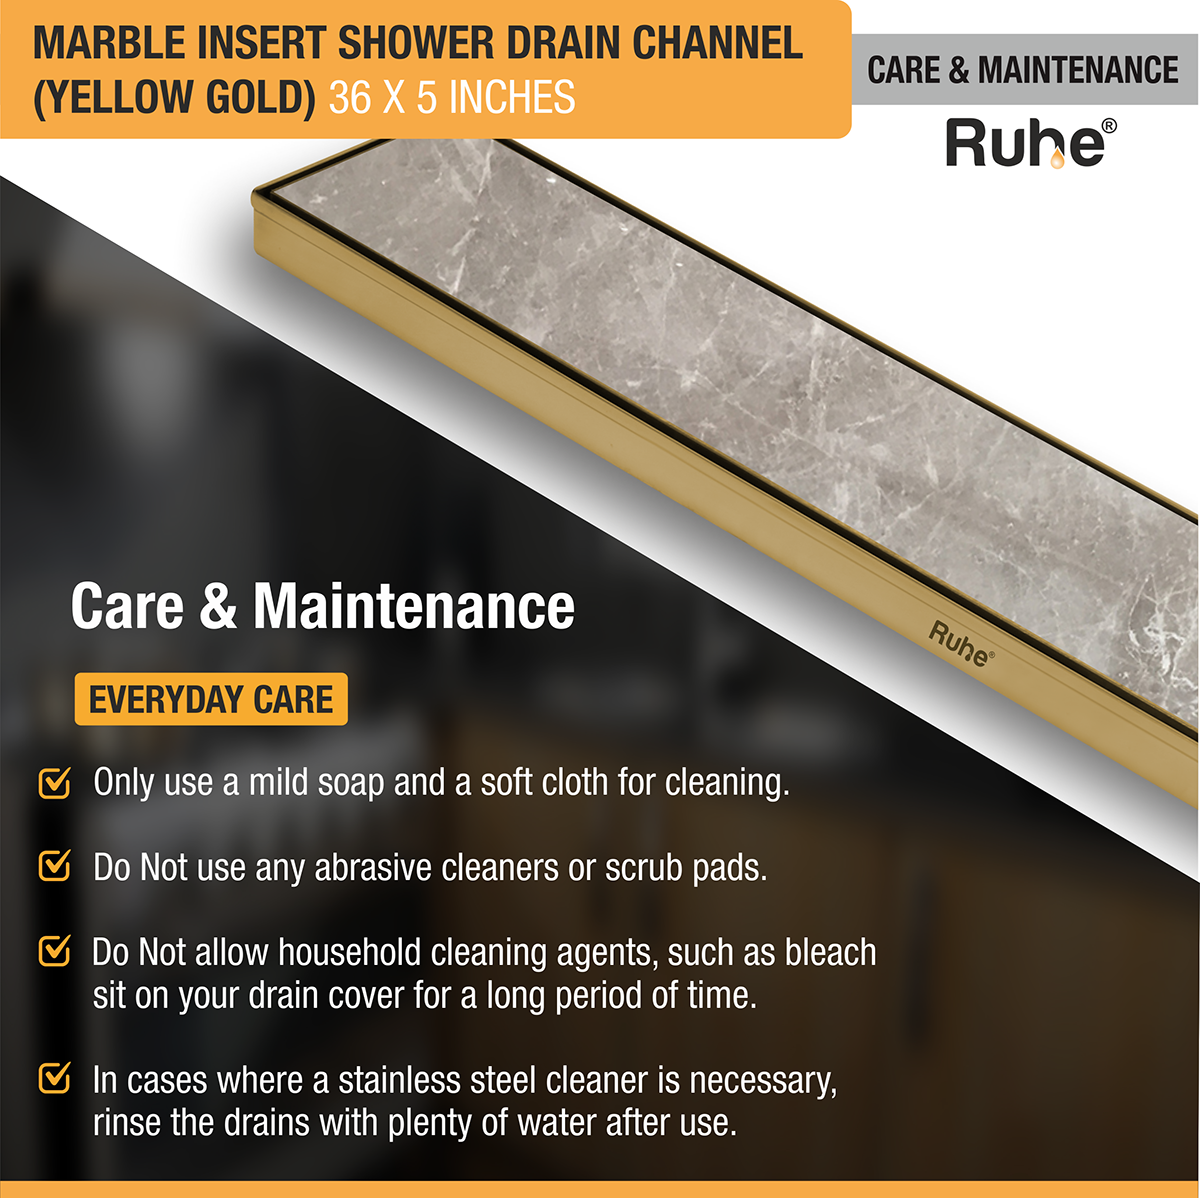 Marble Insert Shower Drain Channel (36 x 5 Inches) YELLOW GOLD PVD Coated care and maintenance